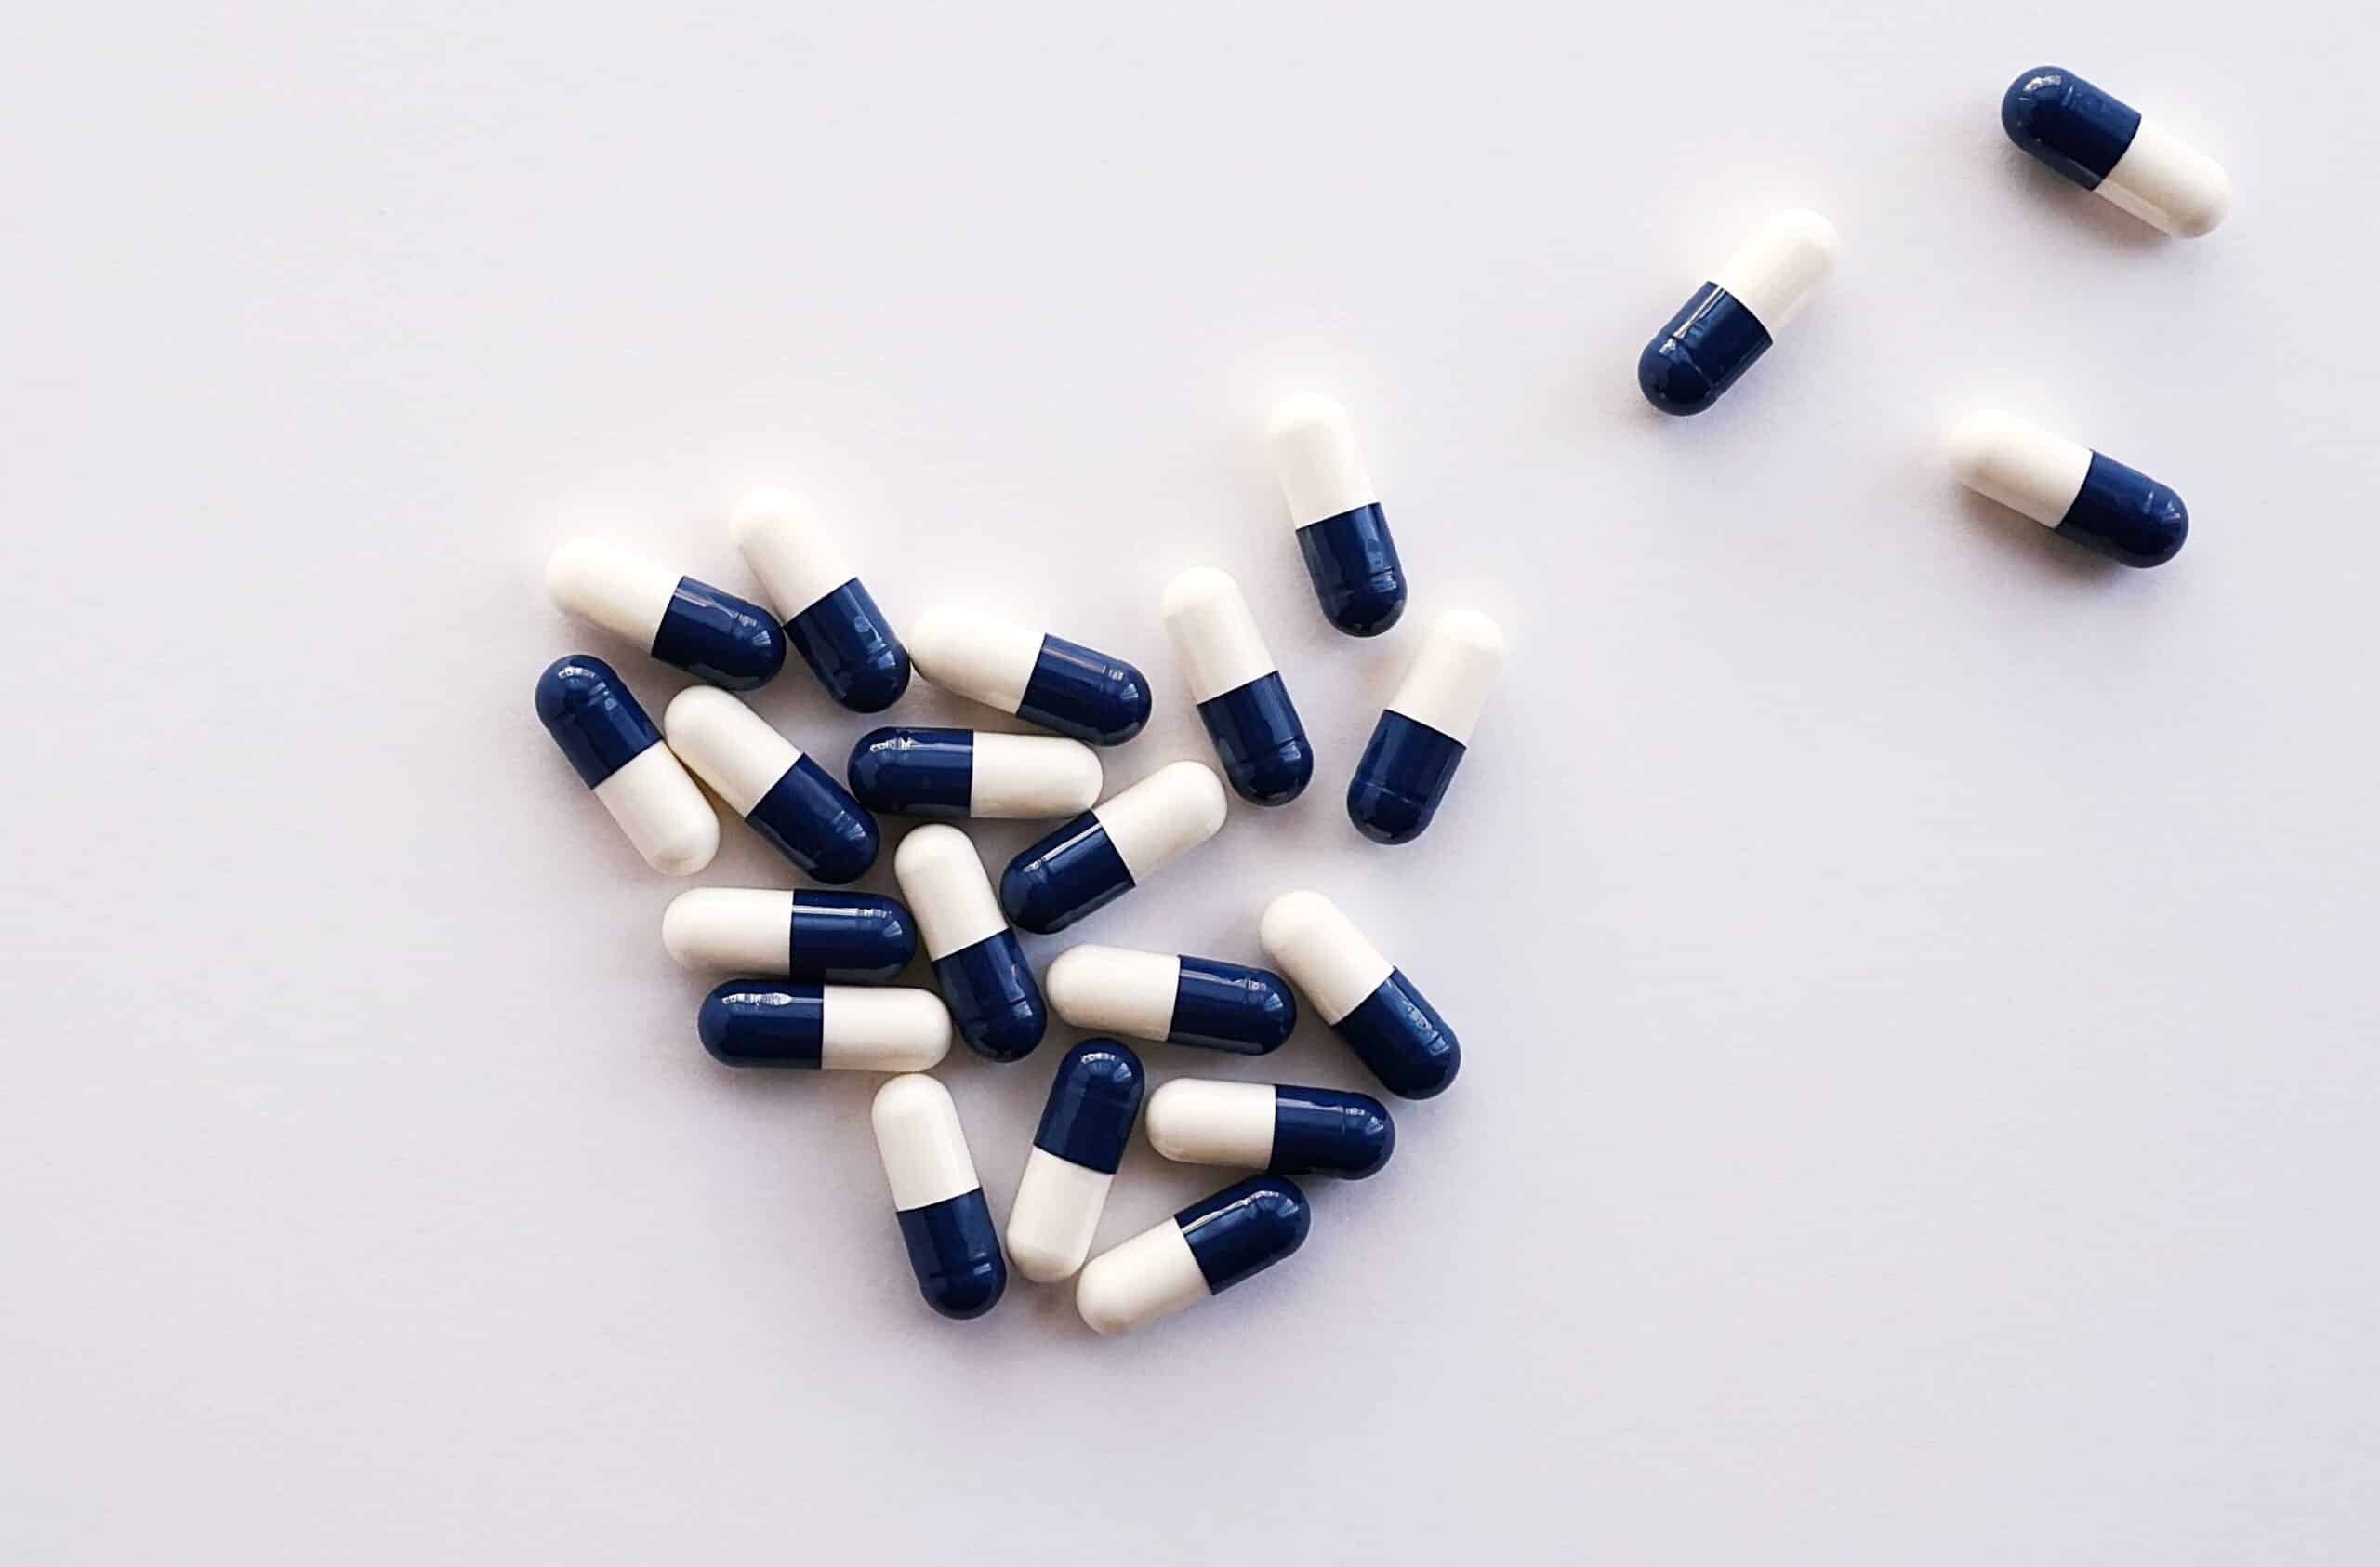 Two tone blue and white colored capsules against a white background